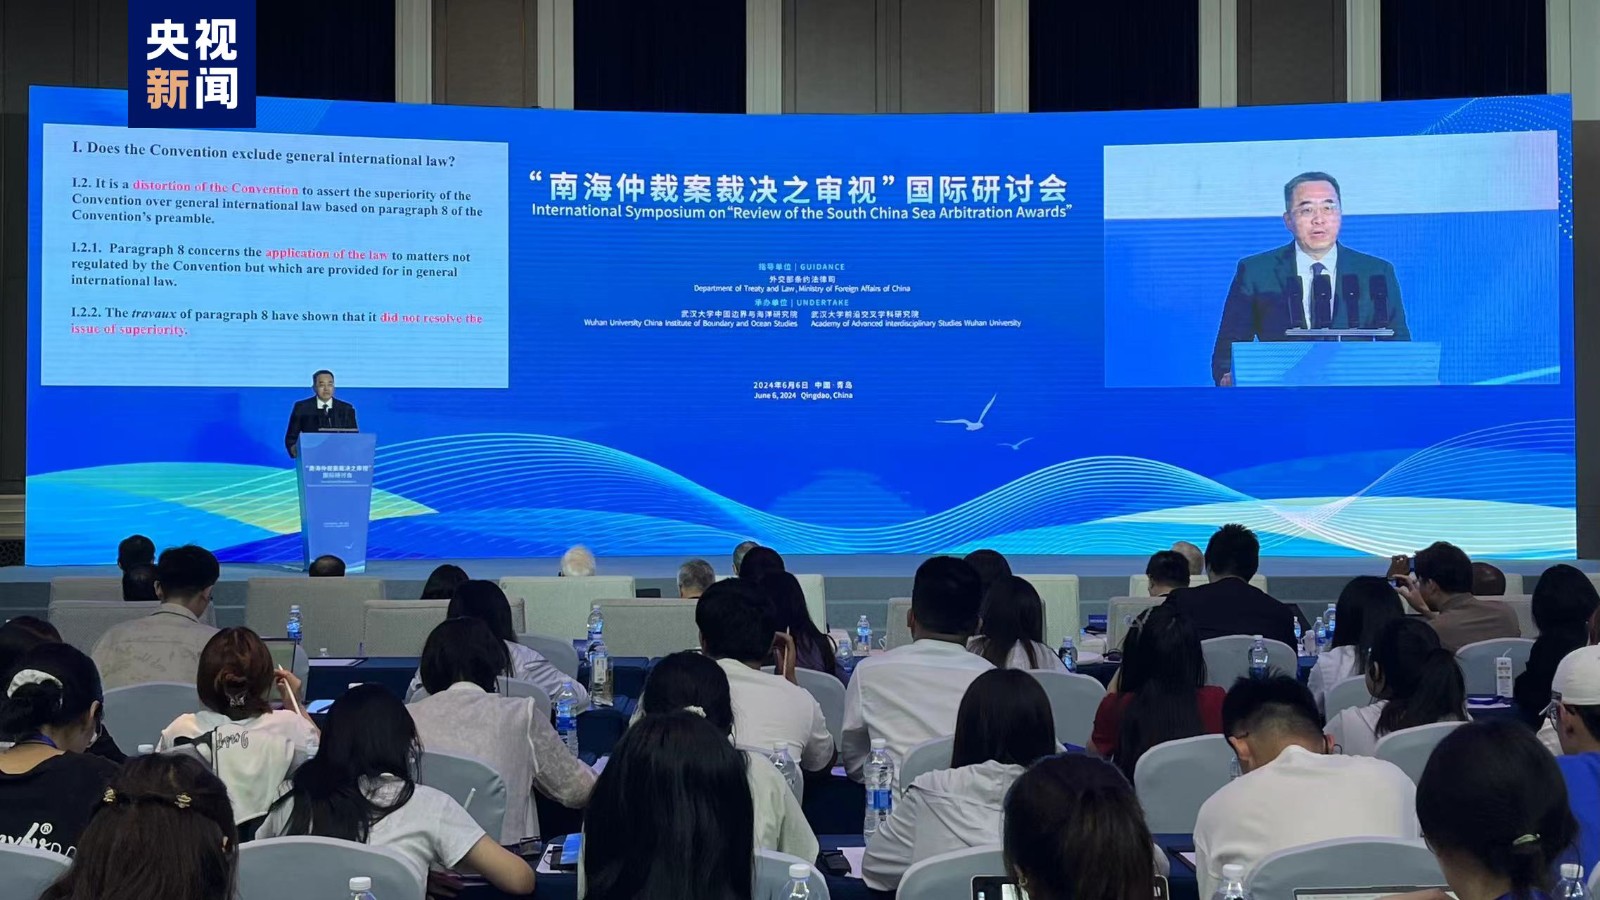 Ma Xinmin, director-general of the Department of Treaty and Law of Chinese Foreign Ministry, delivers a speech at the International Symposium on 